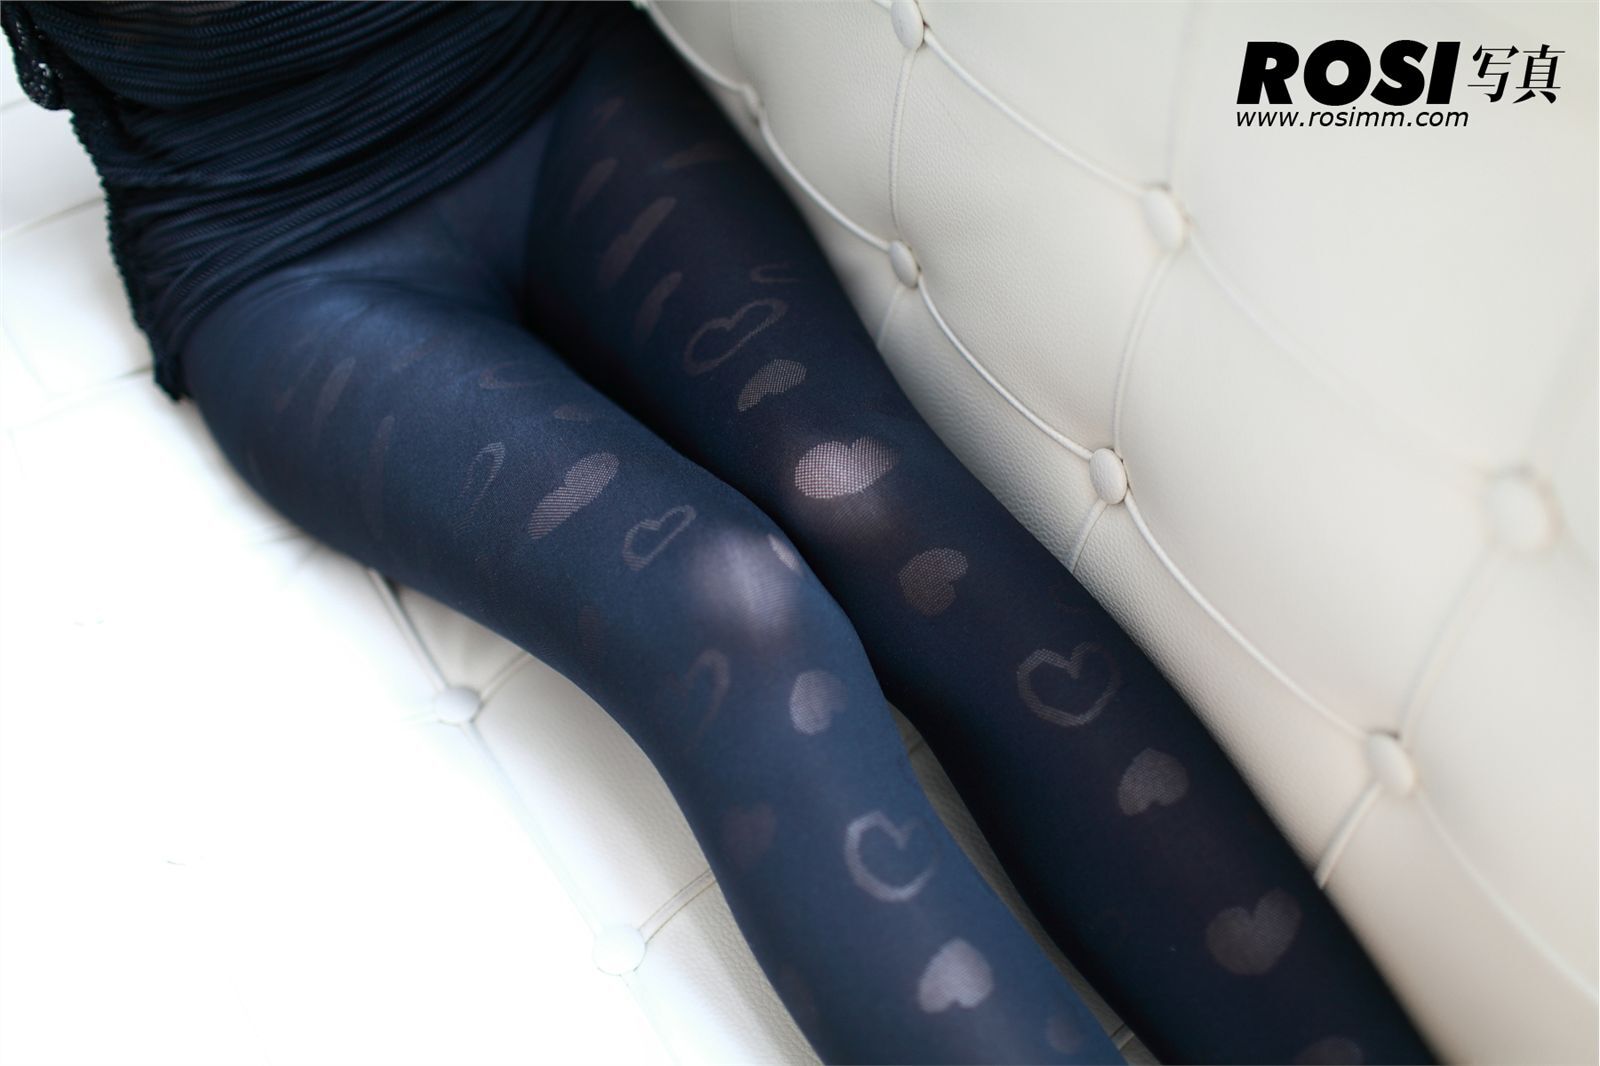 Rosimm-no.292 photo of super attractive silk stockings made in China